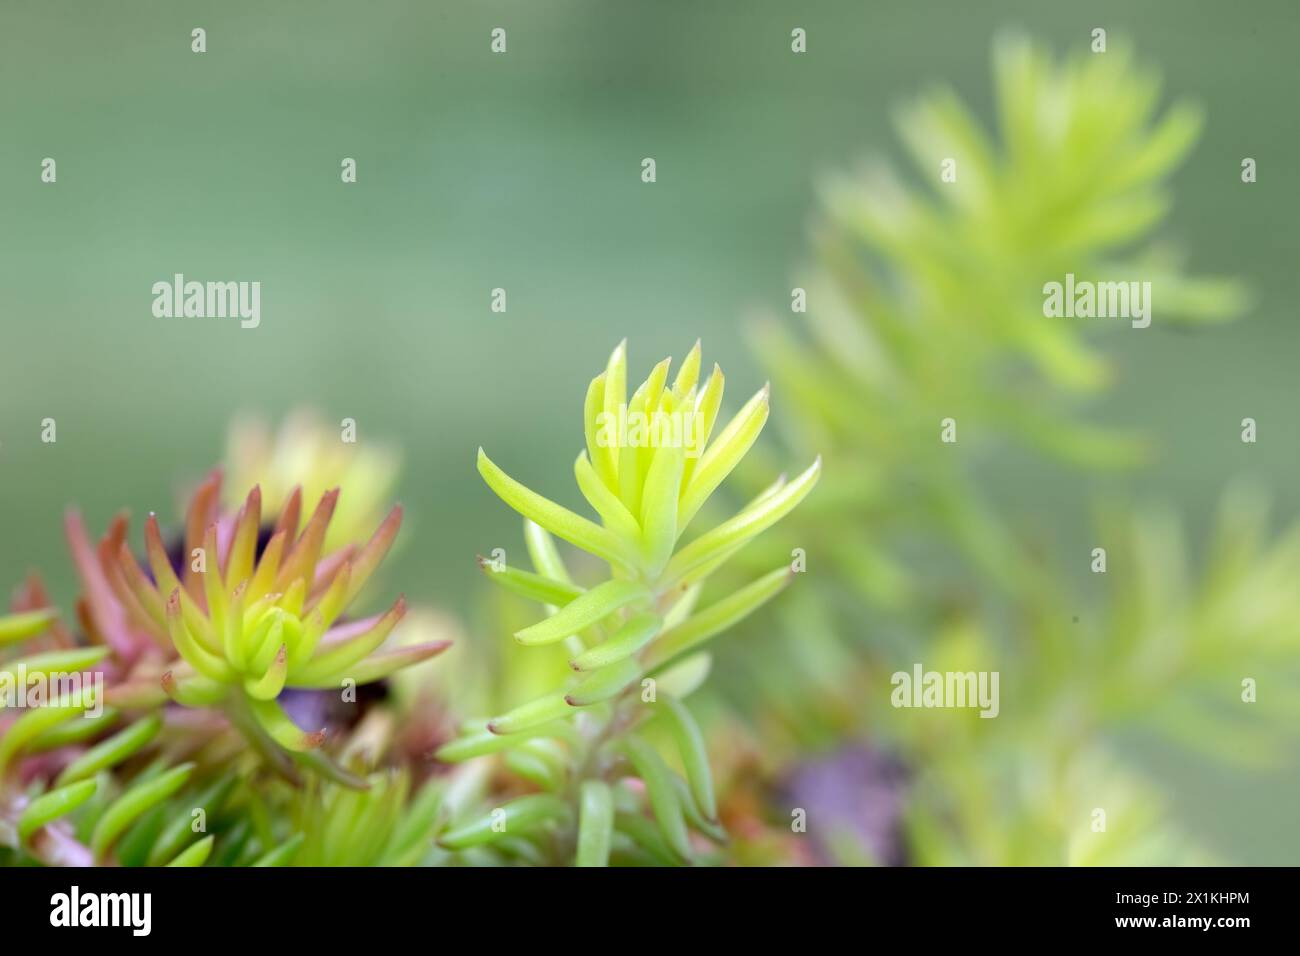 Closeup of leaves of succulent plant Sedum rupestre 'Angelina' against a green background Stock Photo